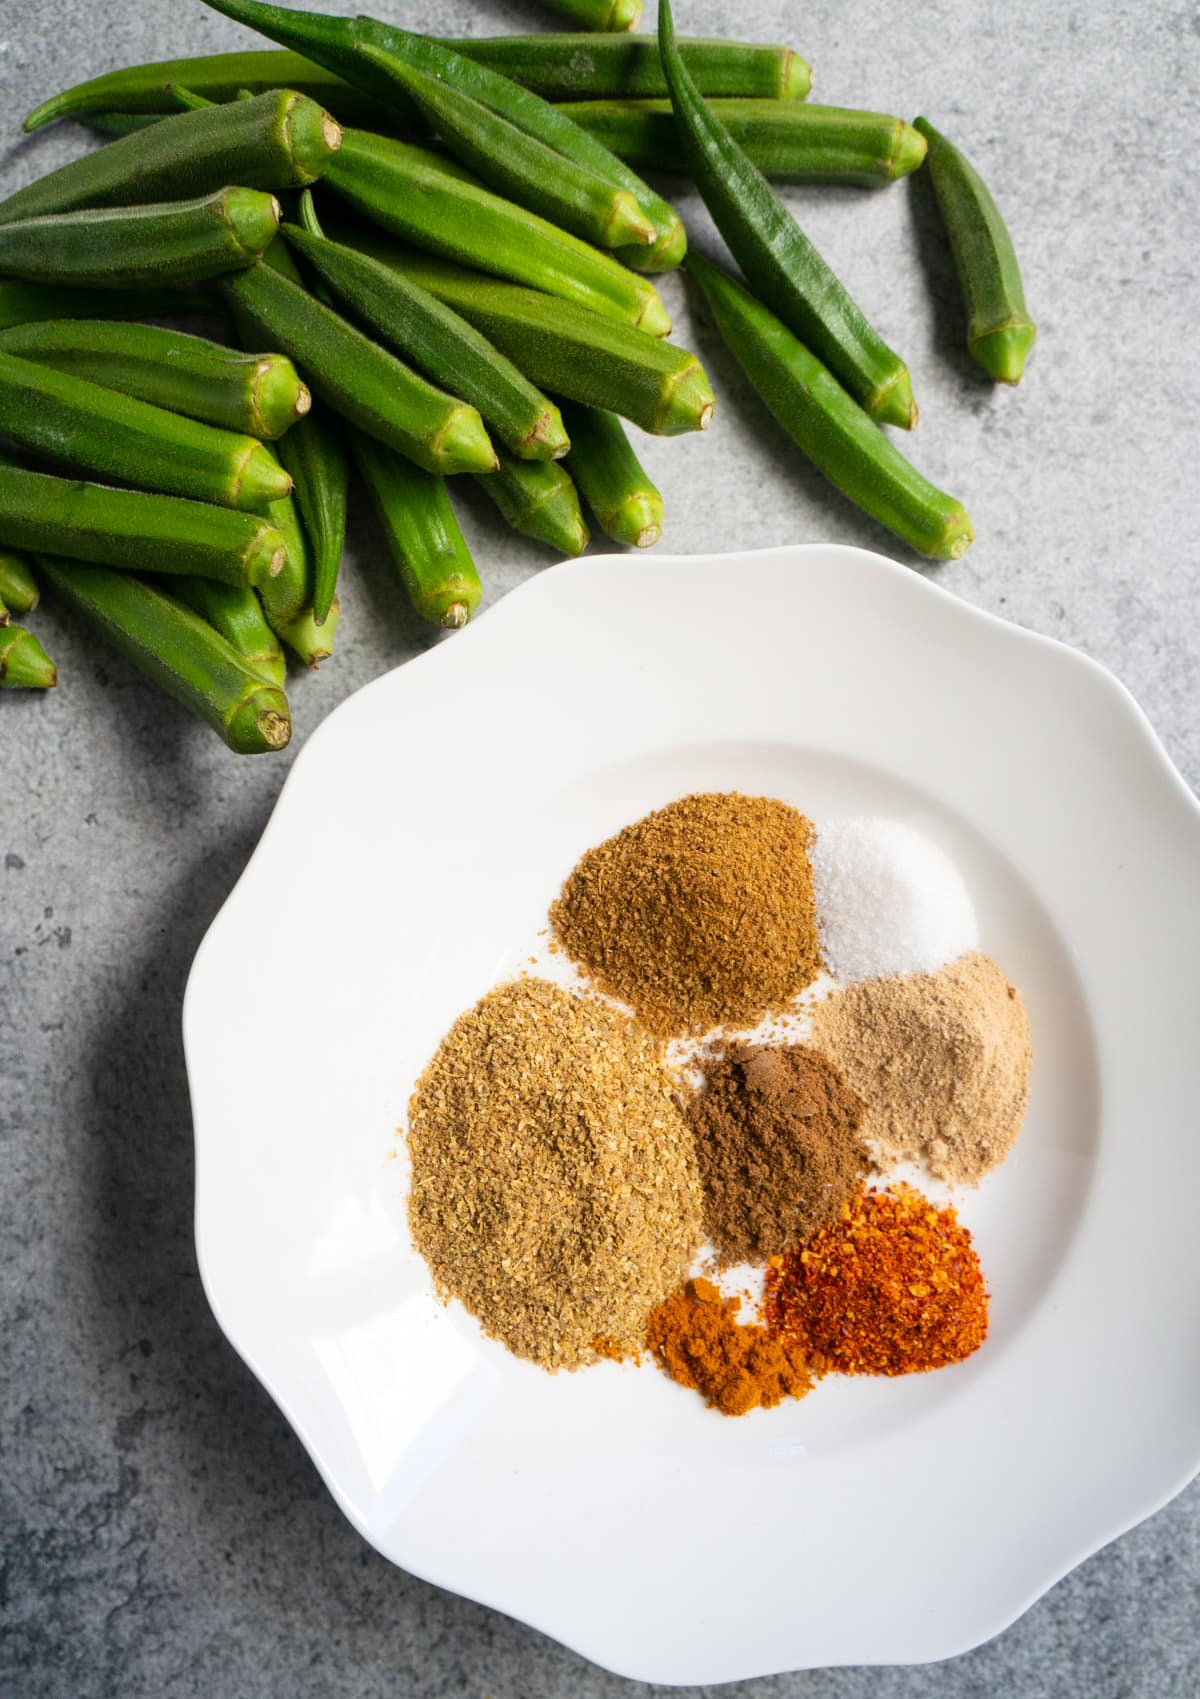 Variety of spices in a white plate to be mixed and stuffed in the okra to make stuffed okra